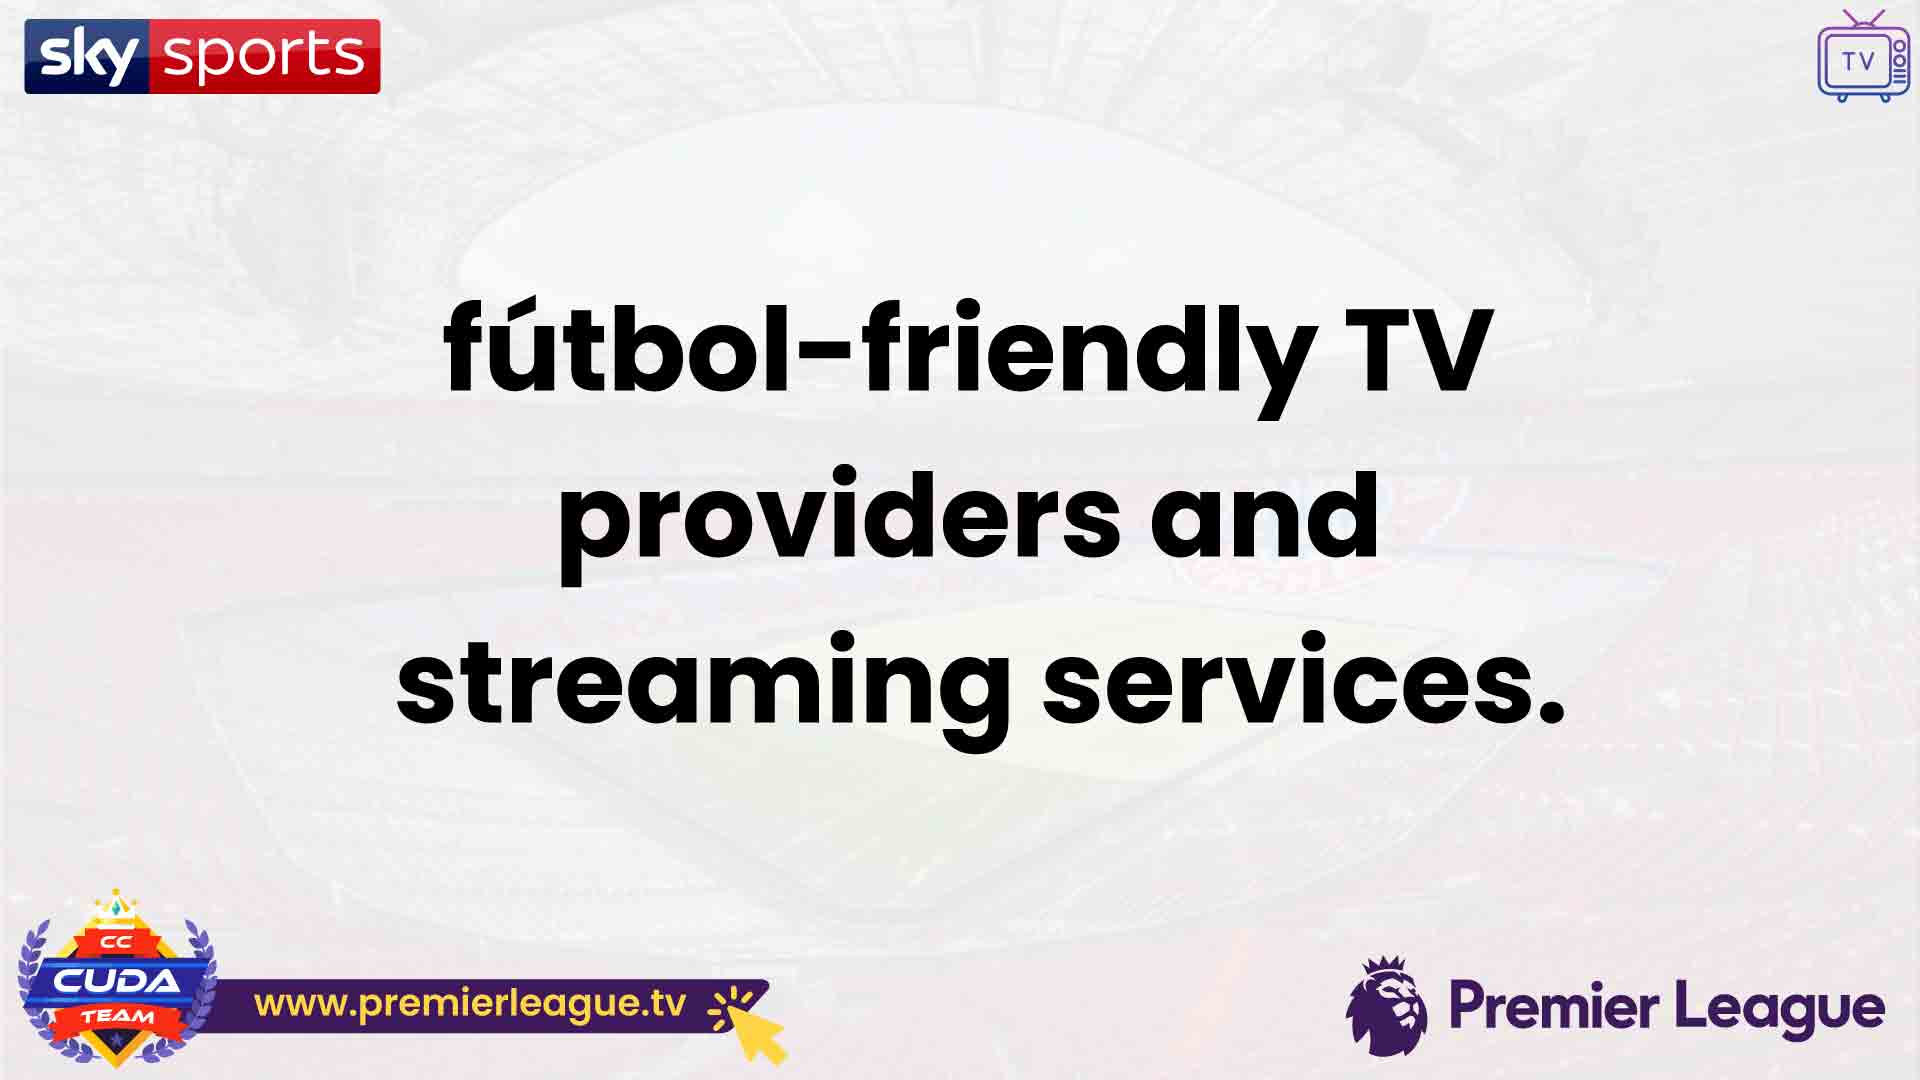 Soccer-fans-can-get-their-kicks-with-these-fútbol-friendly-TV-providers-and-streaming-services